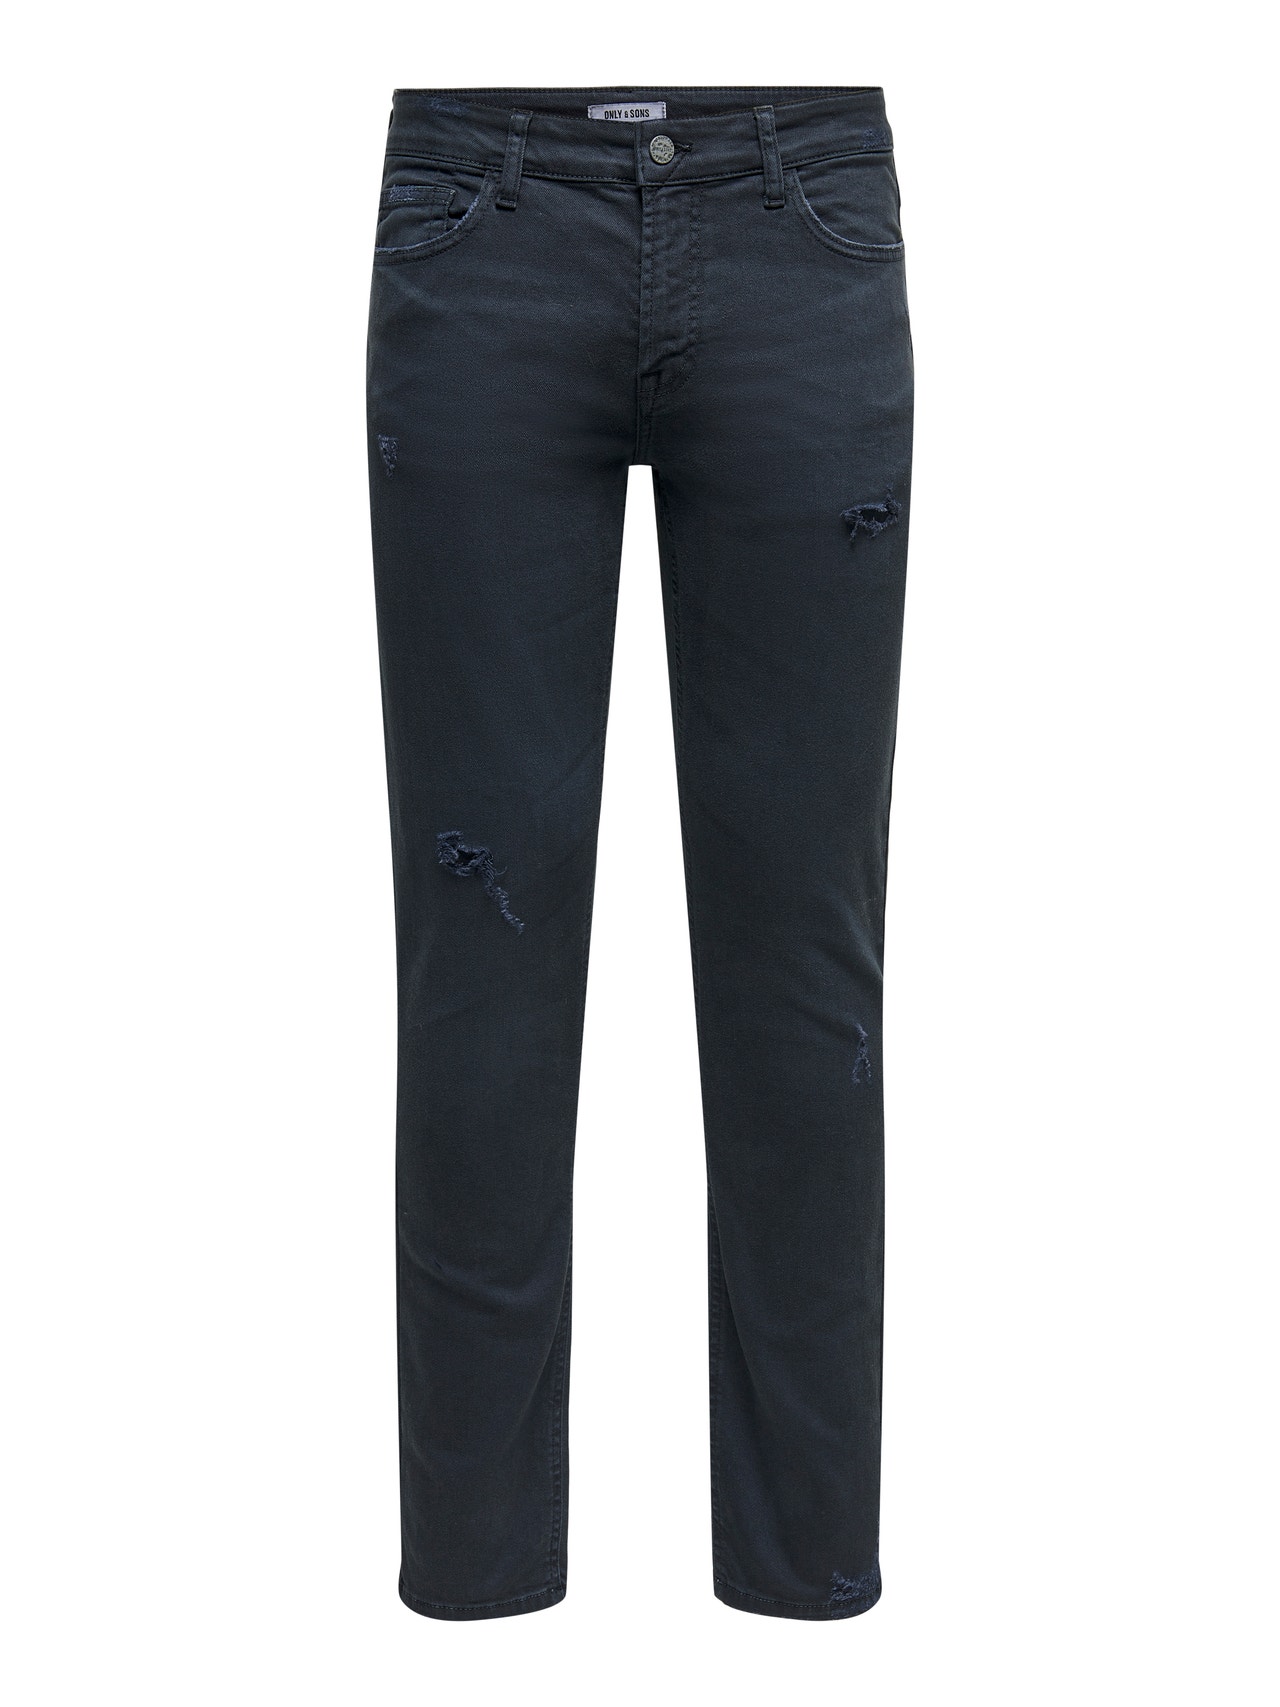 ONLY & SONS ONSLOOM LIFE SLIM WASHED MA 1849 -Dark Navy - 22021849